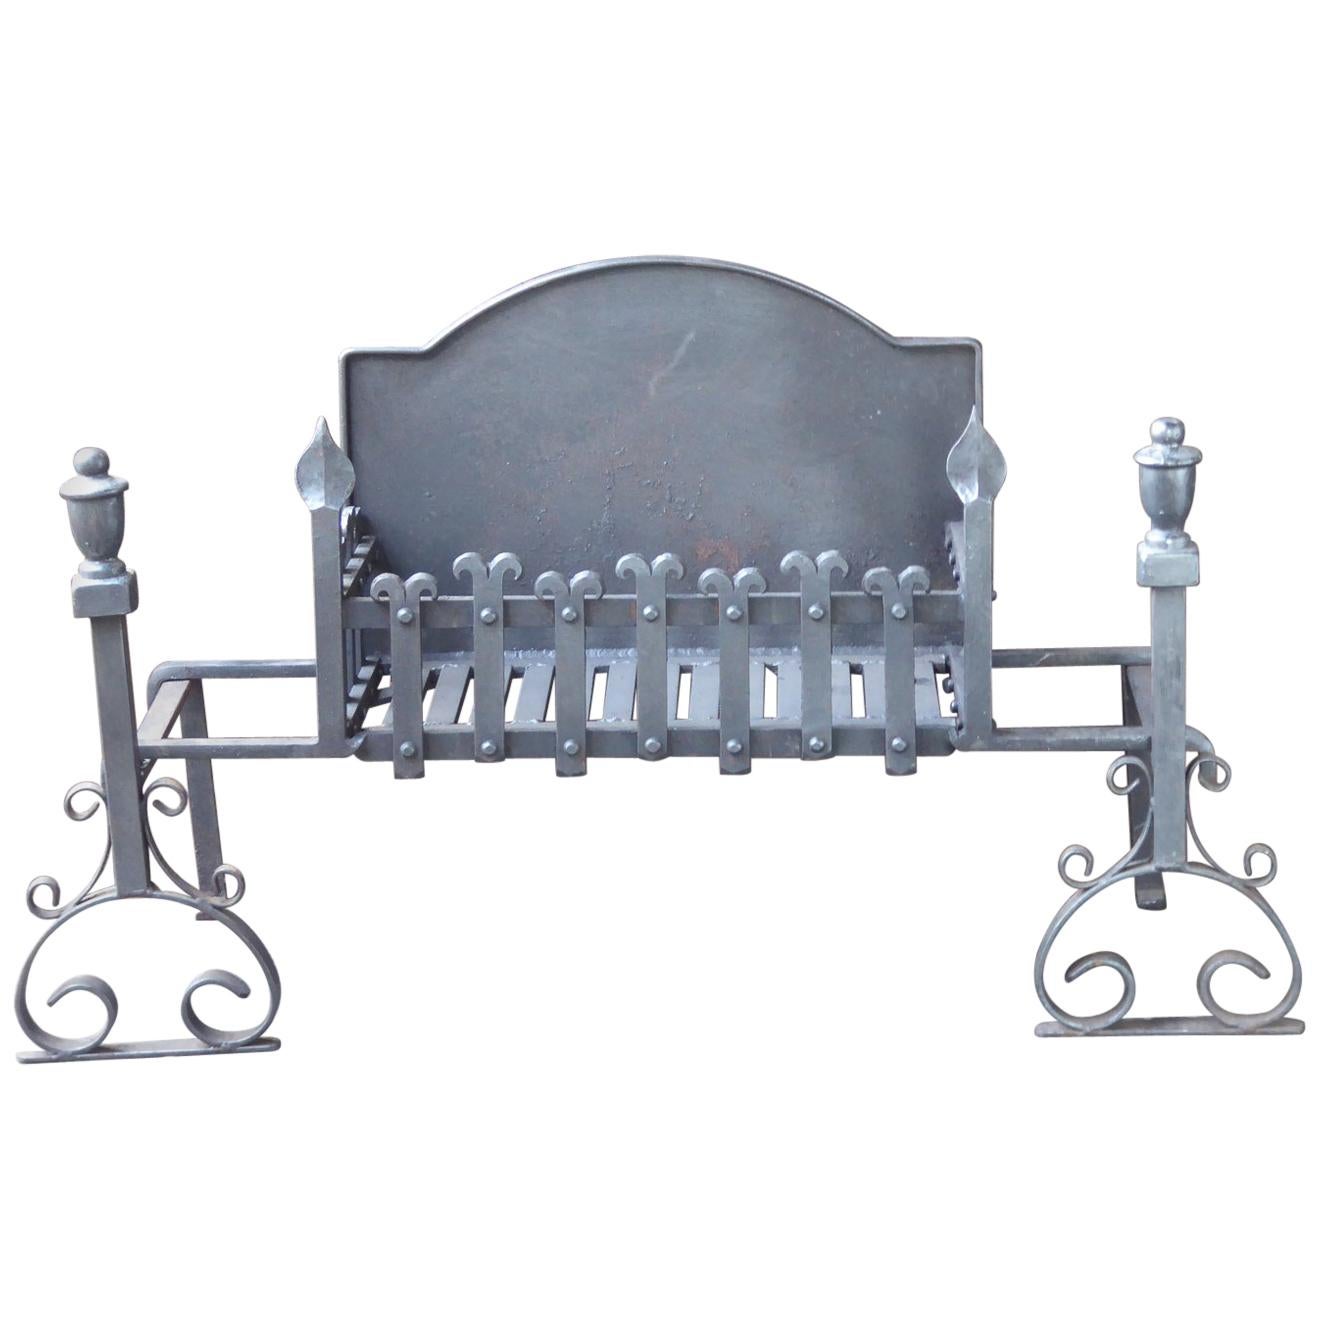 Large English Neo Gothic Fireplace Grate, Fire Grate